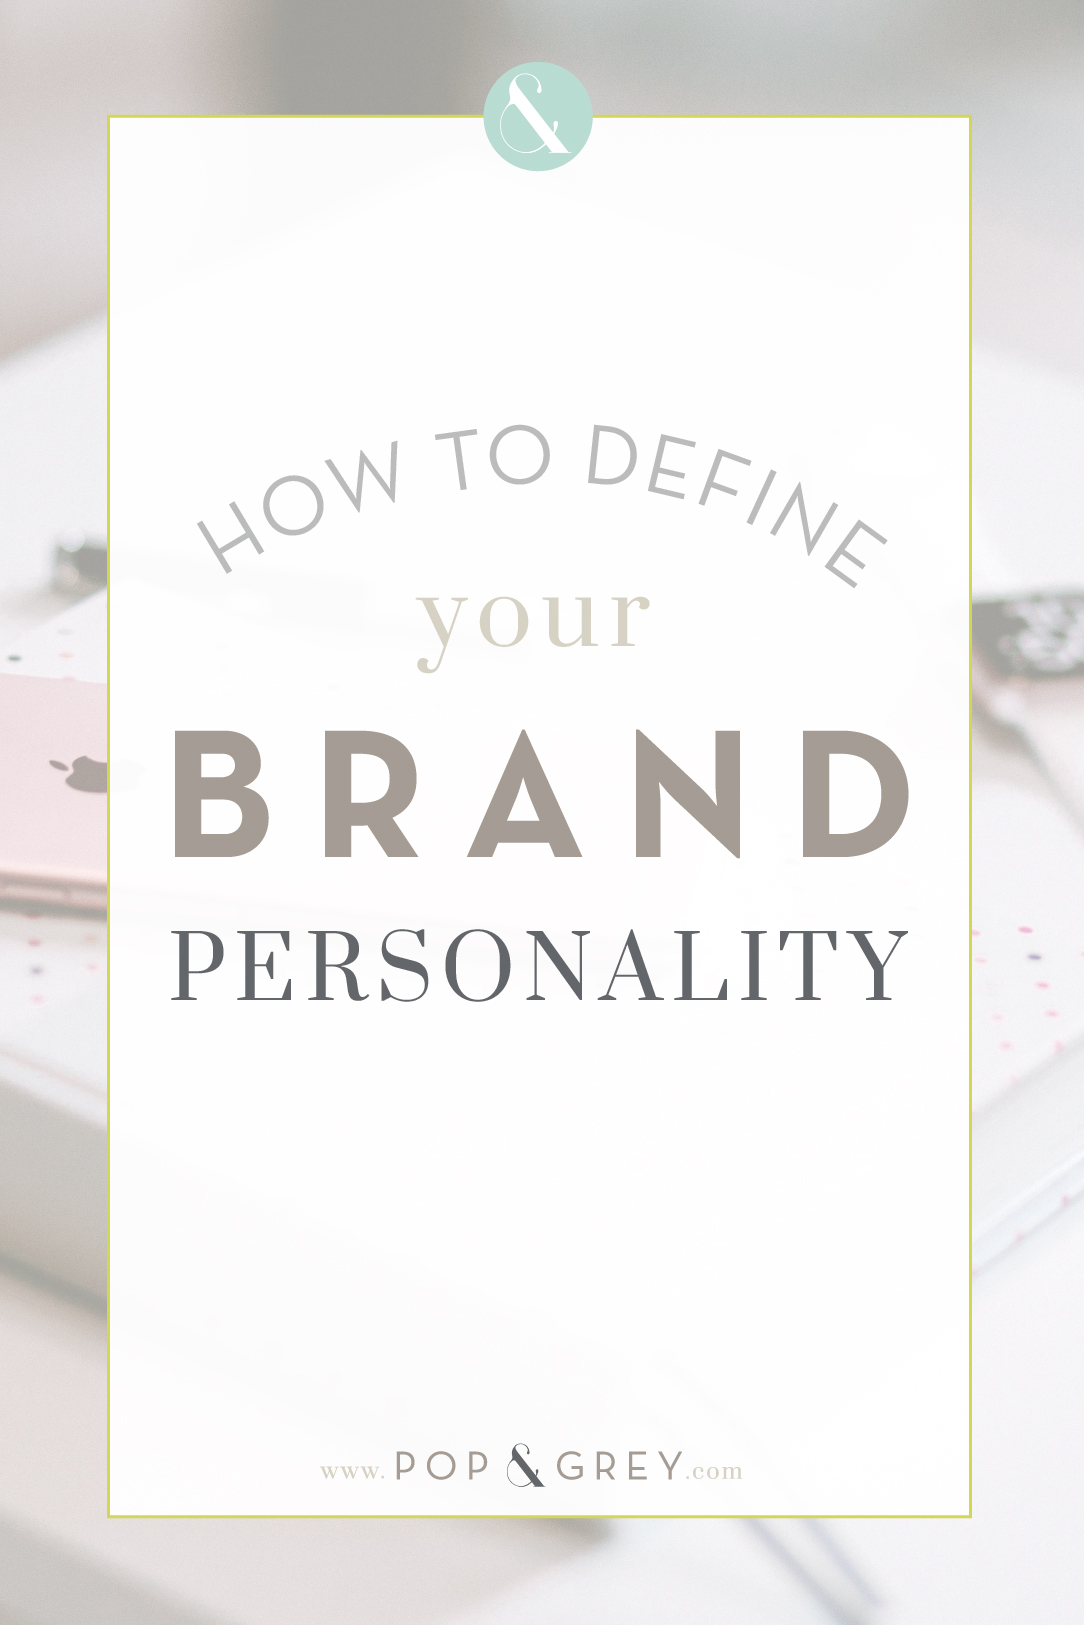 How to define your brand personality by Pop and Grey